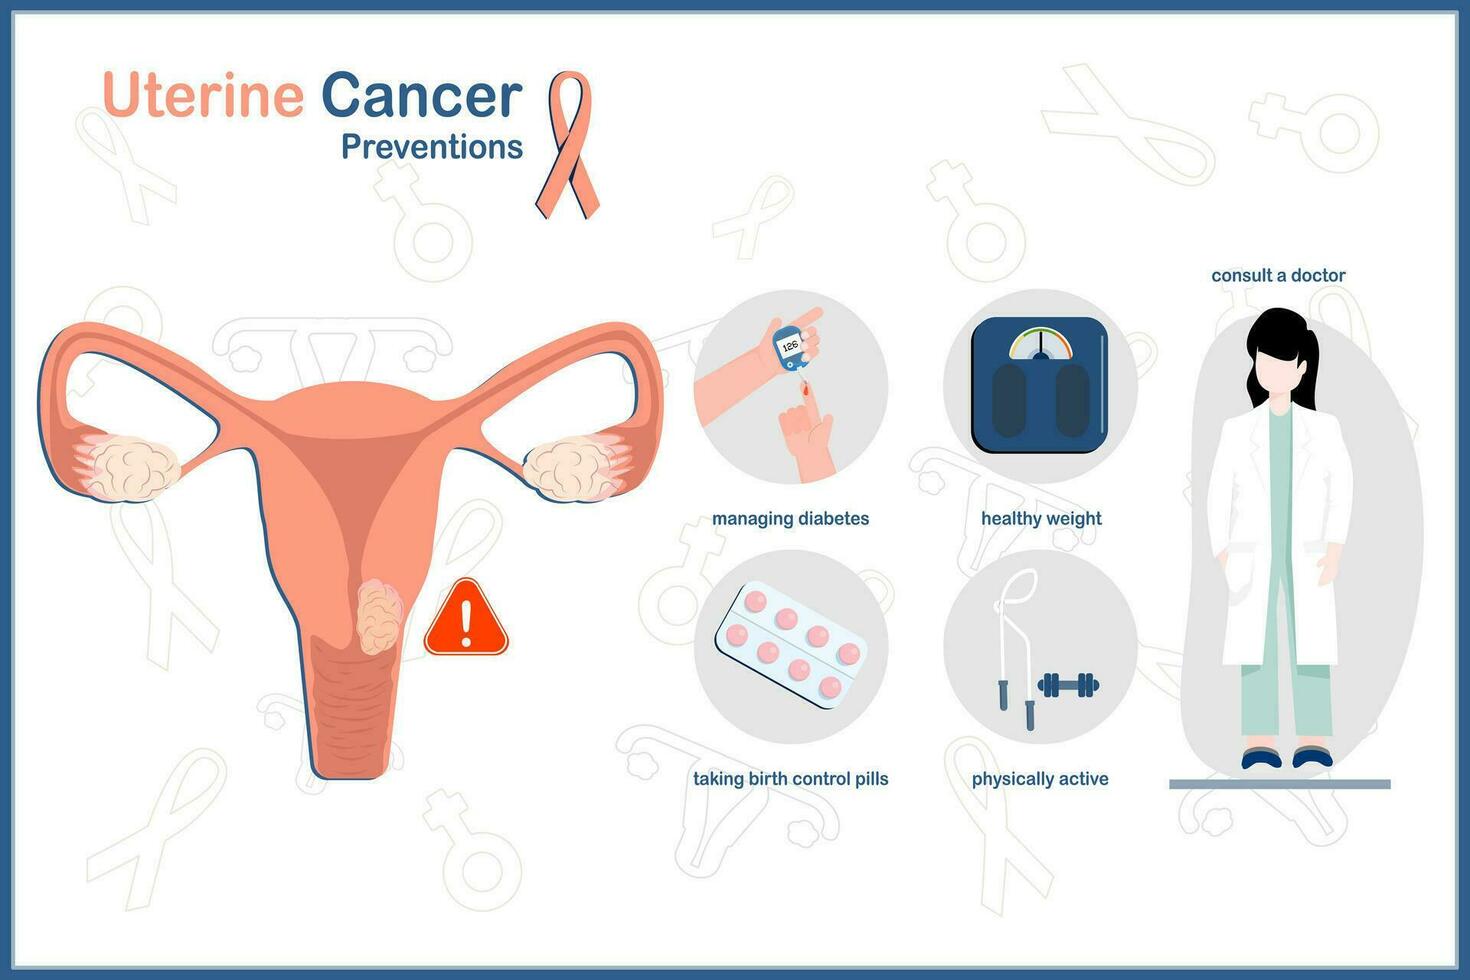 Vector medical illustration in flat style, concept of uterine cancer.Uterine cancer prevention.managing diabetes,healthy weight,physically active,consultant to doctors,taking birth control pills.